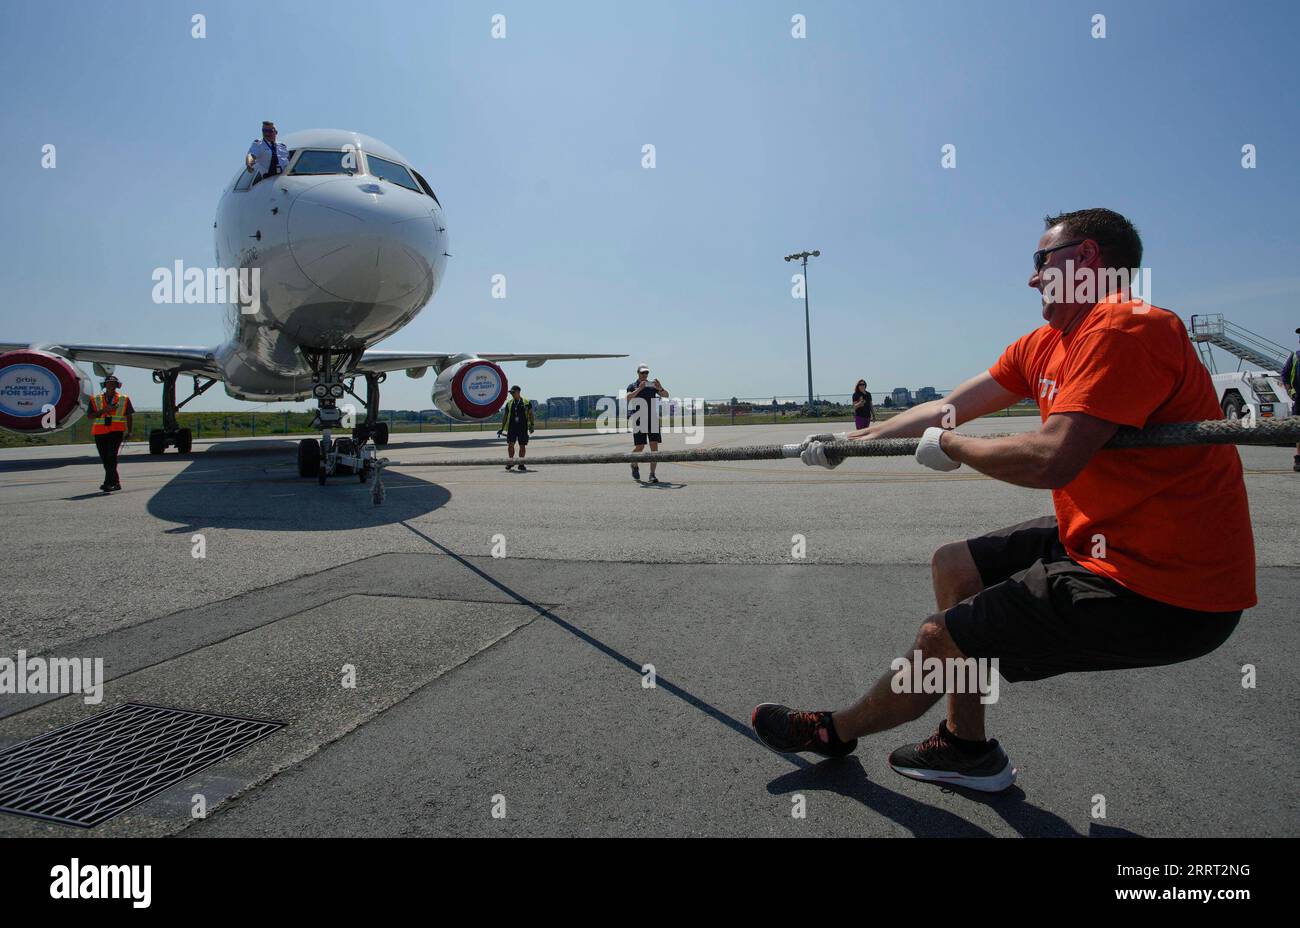 230626 -- VANCOUVER, June 26, 2023 -- People participate in the Plane Pull For Sight event at Vancouver International Airport in Vancouver, British Columbia, Canada, on June 25, 2023. Participants took part in a challenge to pull a Boeing 757 jet weighing over 60,000 kilograms across the tarmac at Vancouver International Airport on Sunday to raise money for Orbis International to provide essential eye care services to communities in developing countries. Photo by /Xinhua CANADA-VANCOUVER-PLANE PULL CHALLENGE LiangxSen PUBLICATIONxNOTxINxCHN Stock Photo